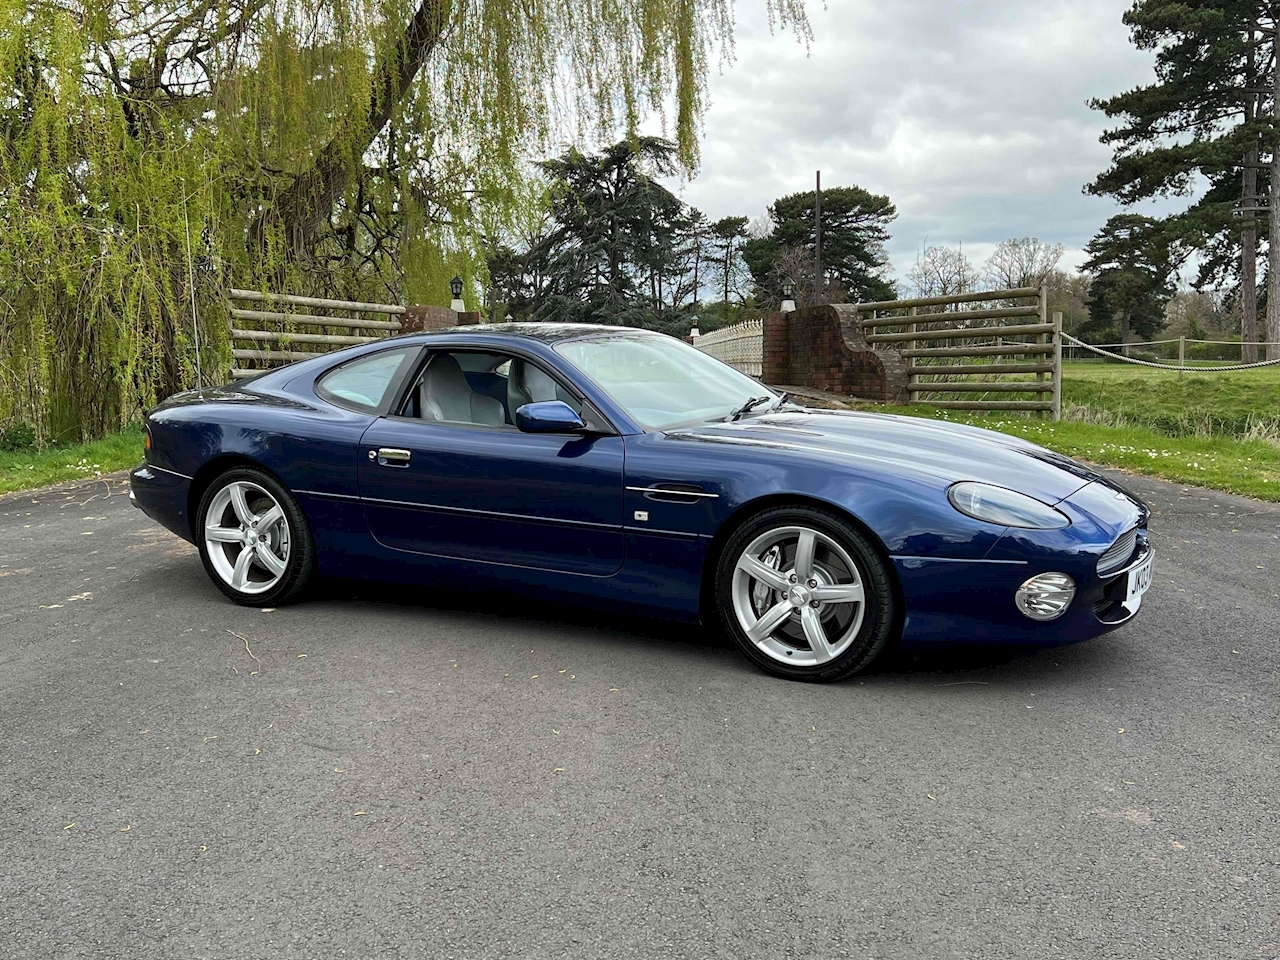 5.9 GT Coupe 2dr Petrol Manual (469 g/km, 435 bhp)